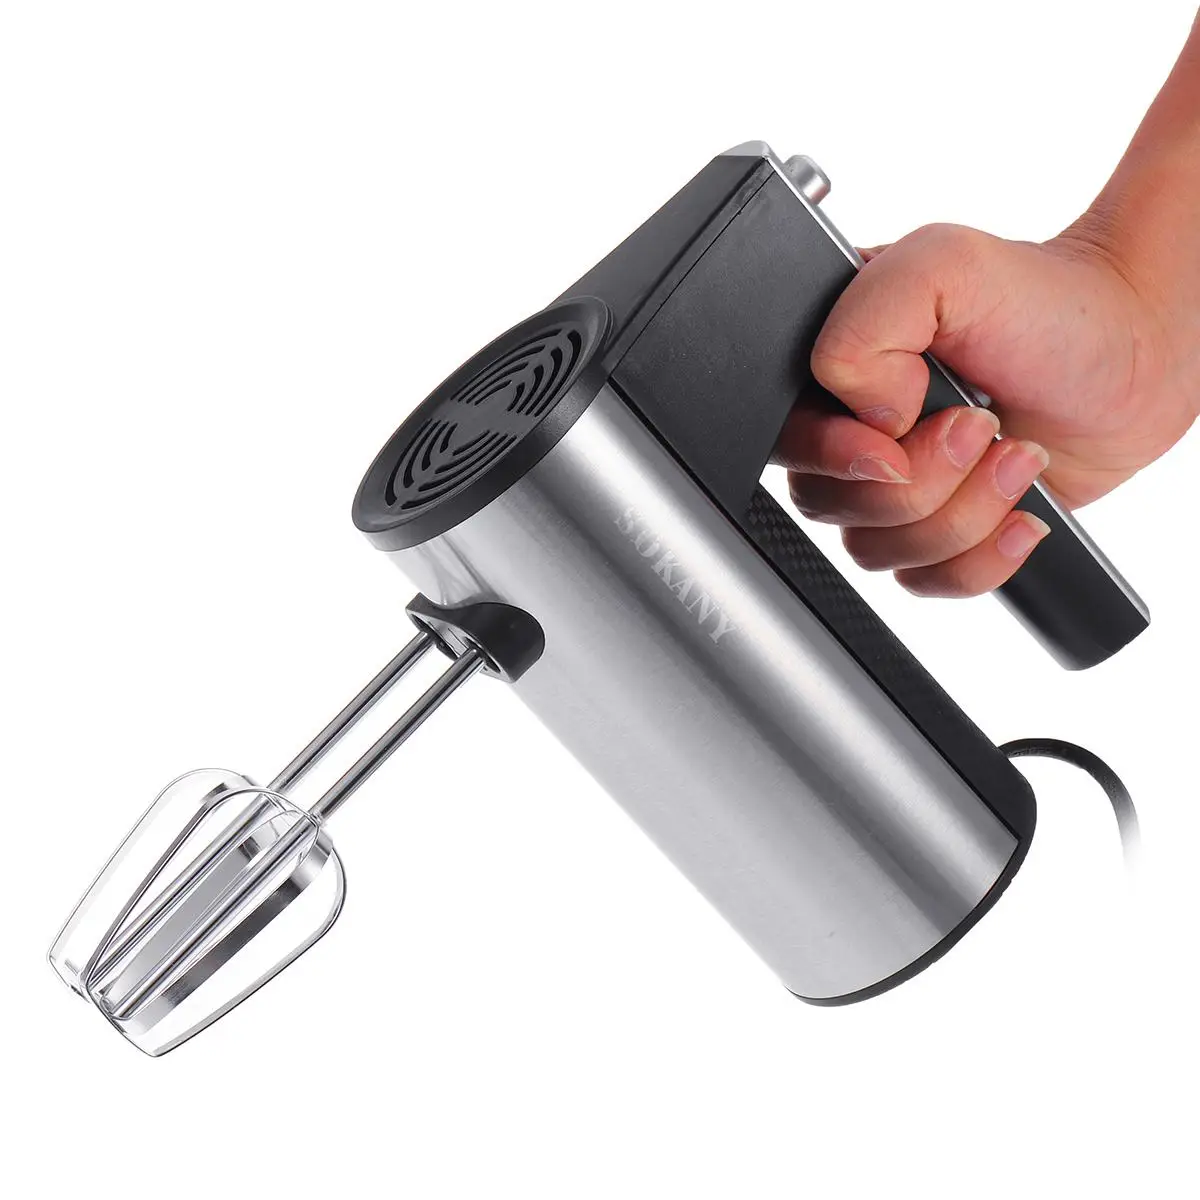 300W 5 Speed Electric Hand Mixer Whisk Egg Beater Cake Baking Home...